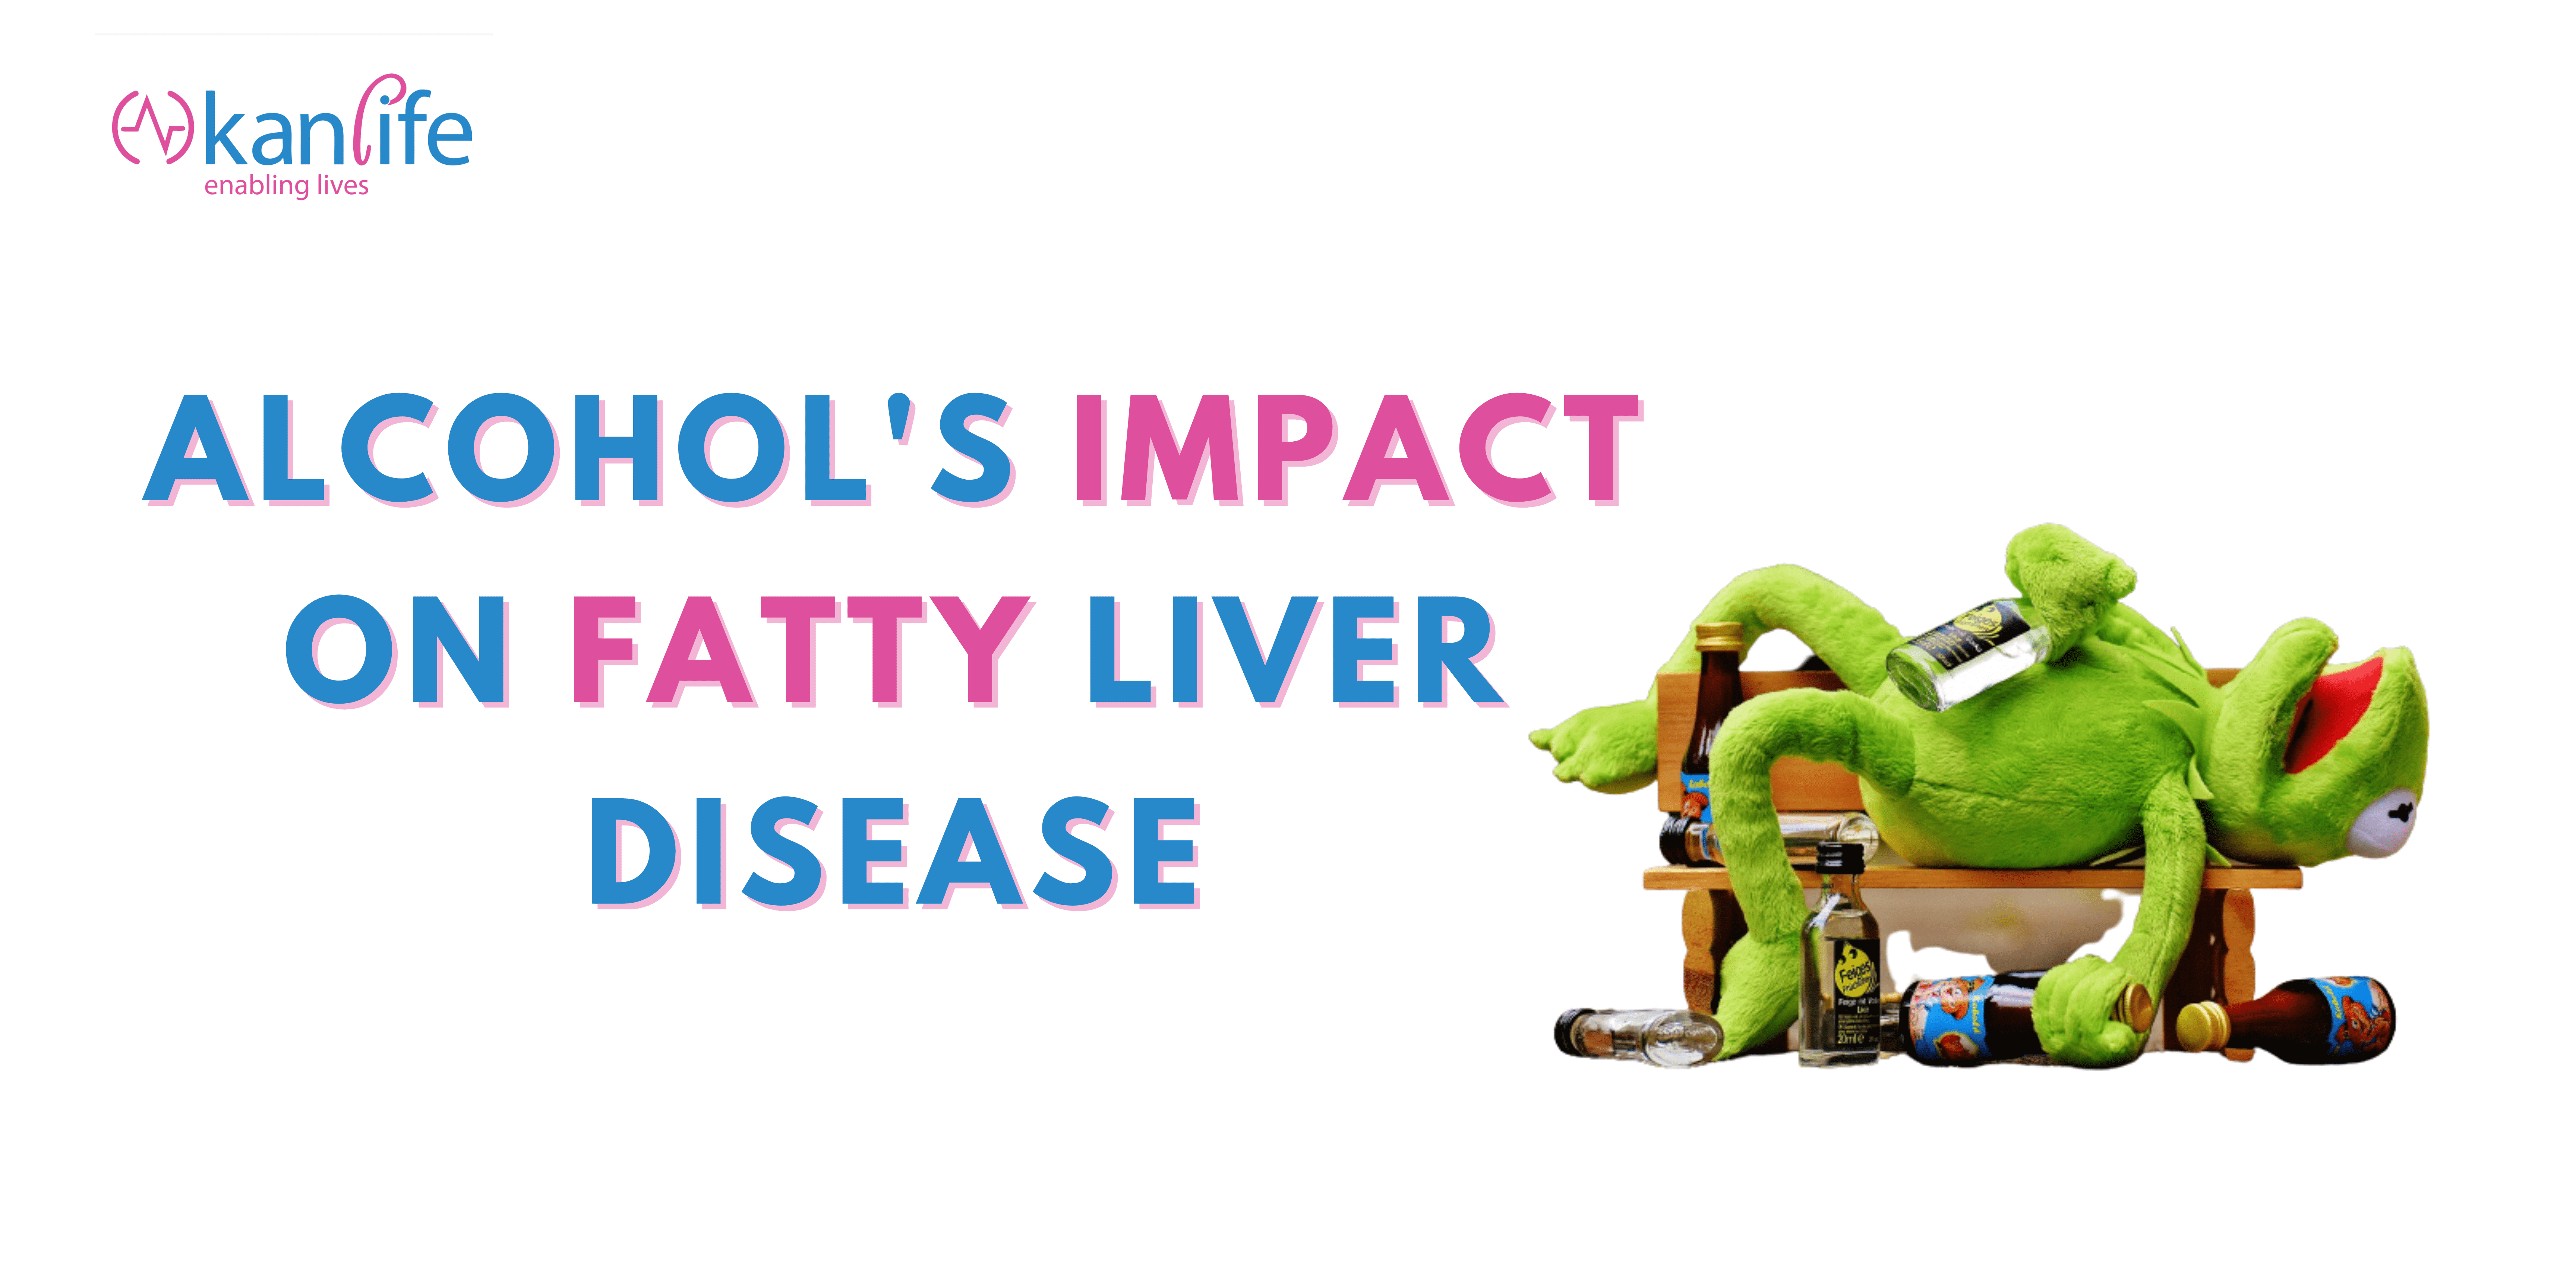 How does alcohol consumption contribute to the development of alcoholic fatty liver disease?